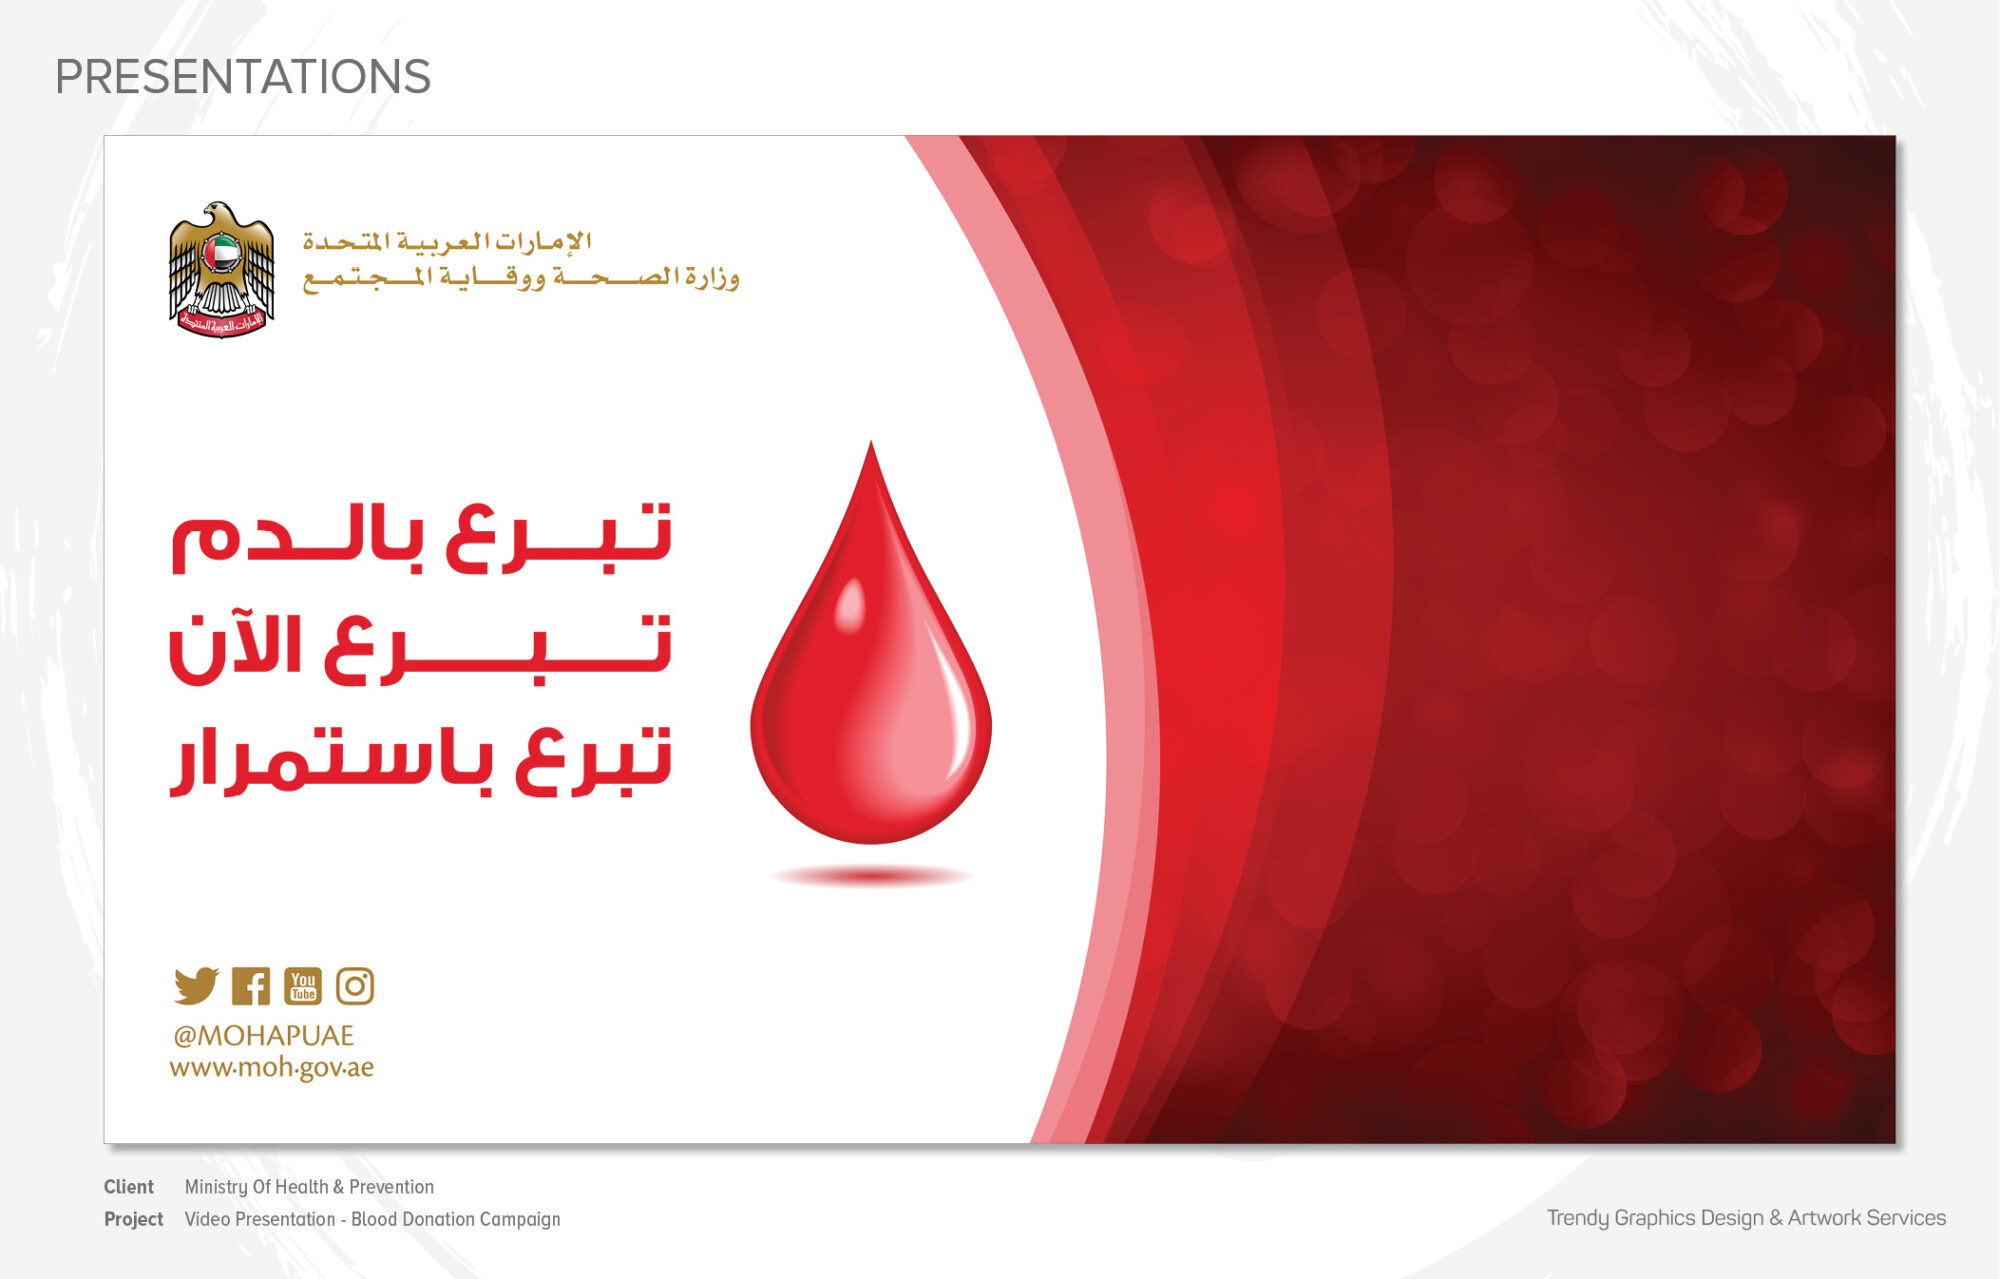 Ministry Of Health & Prevention – Video Presentation - Blood Donation Campaign